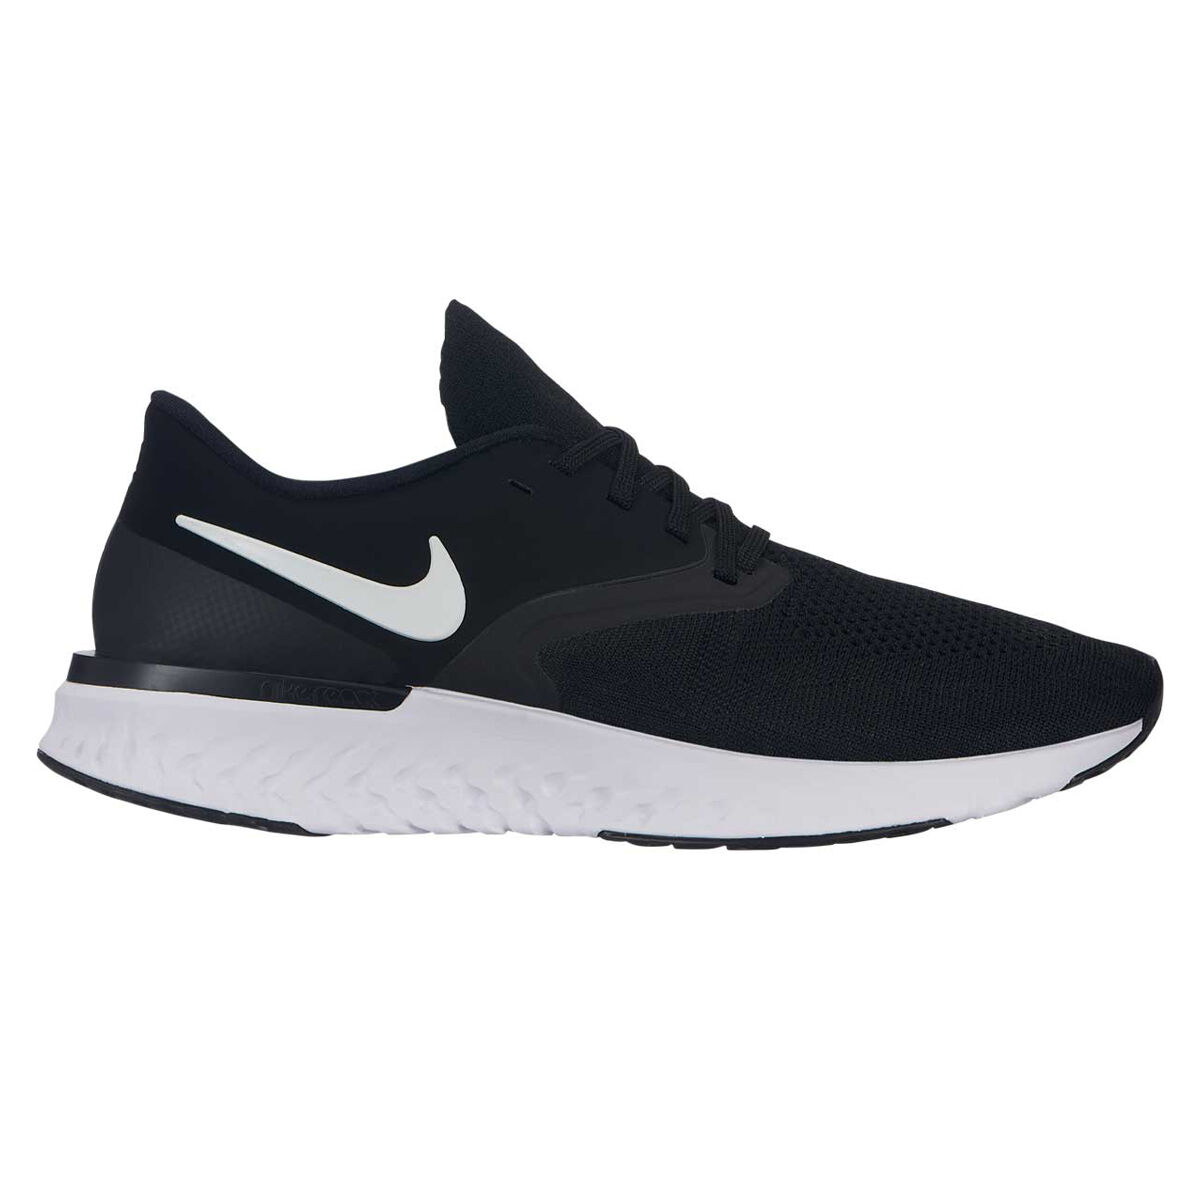 Nike Odyssey React 2 Mens Running Shoes 